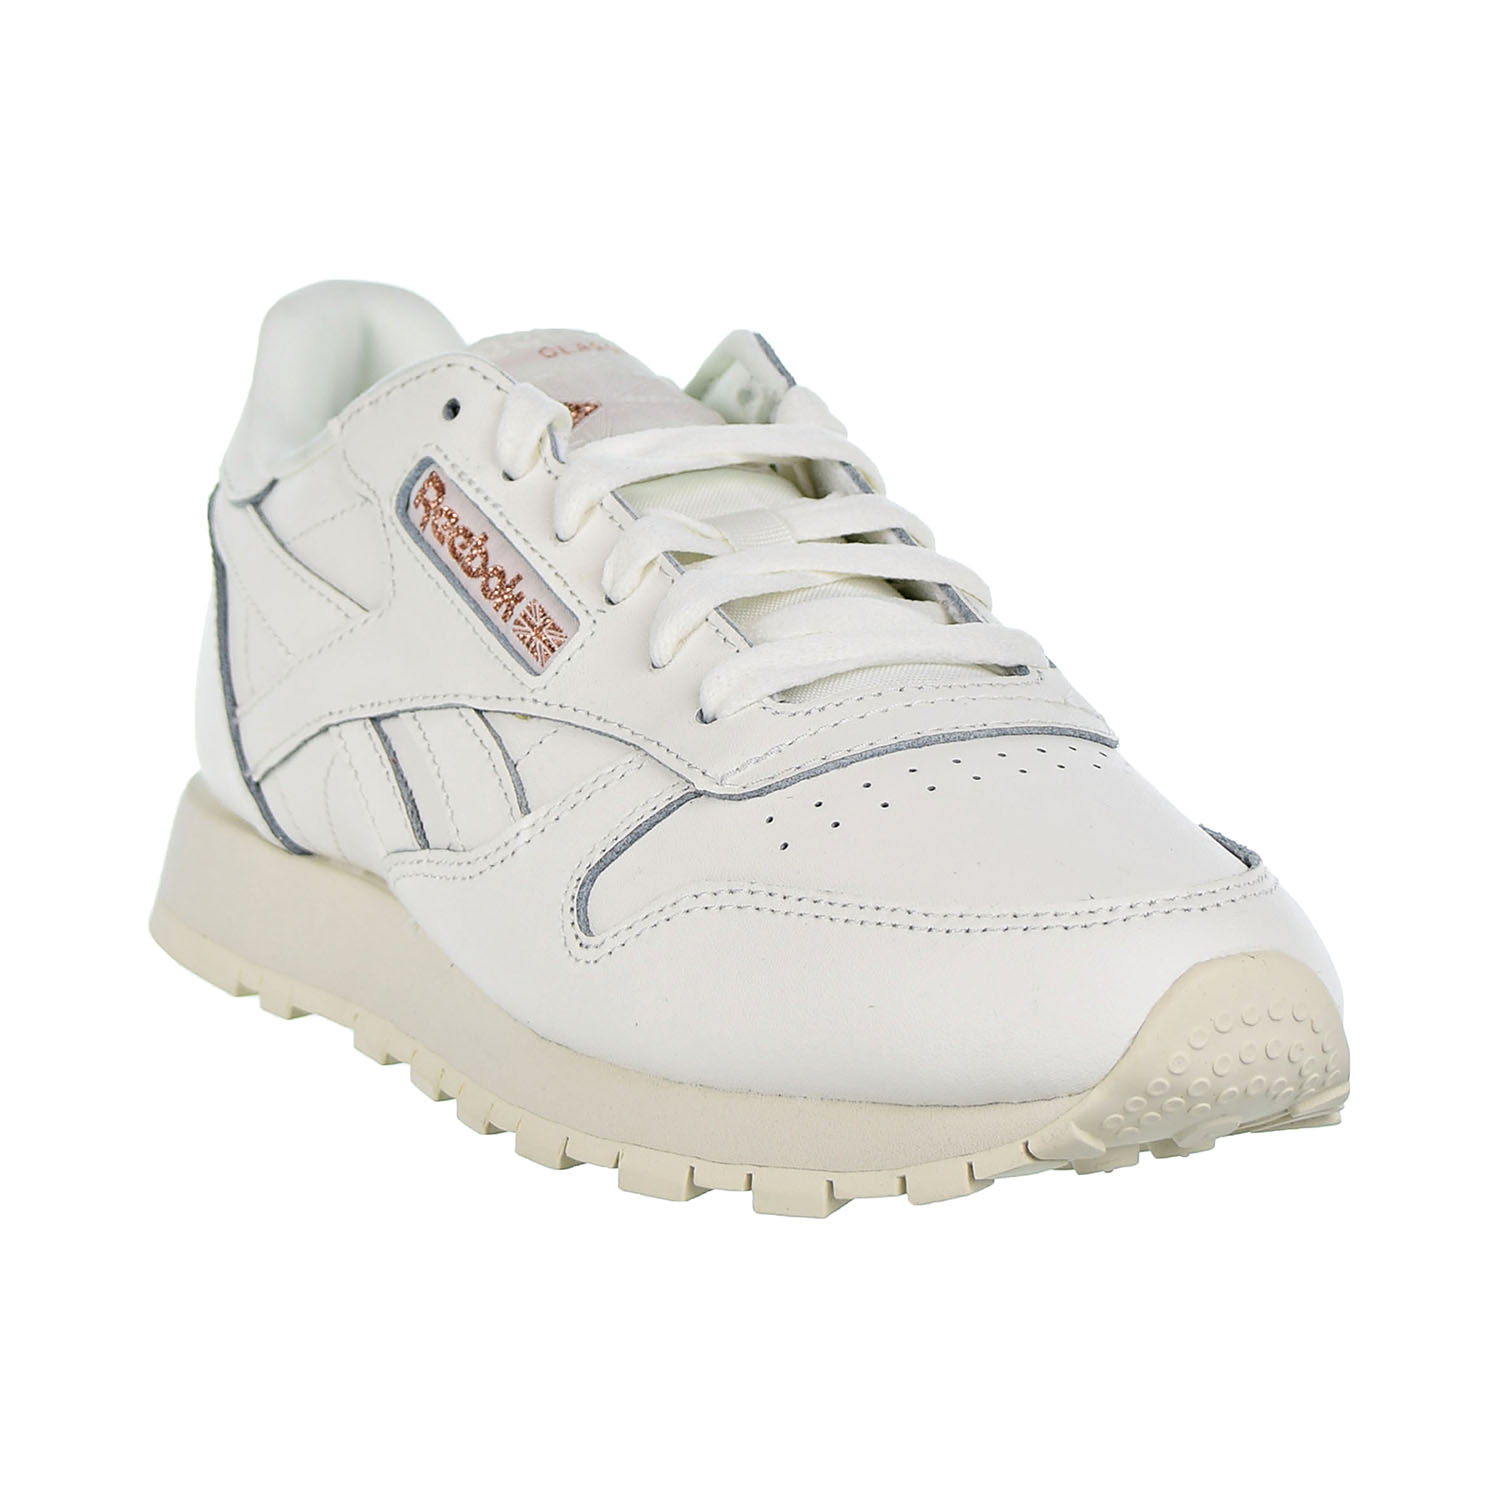 different feedback Vegetation Reebok Classic Leather Women's Shoes Chalk/Rose Gold/Paper White dv3762